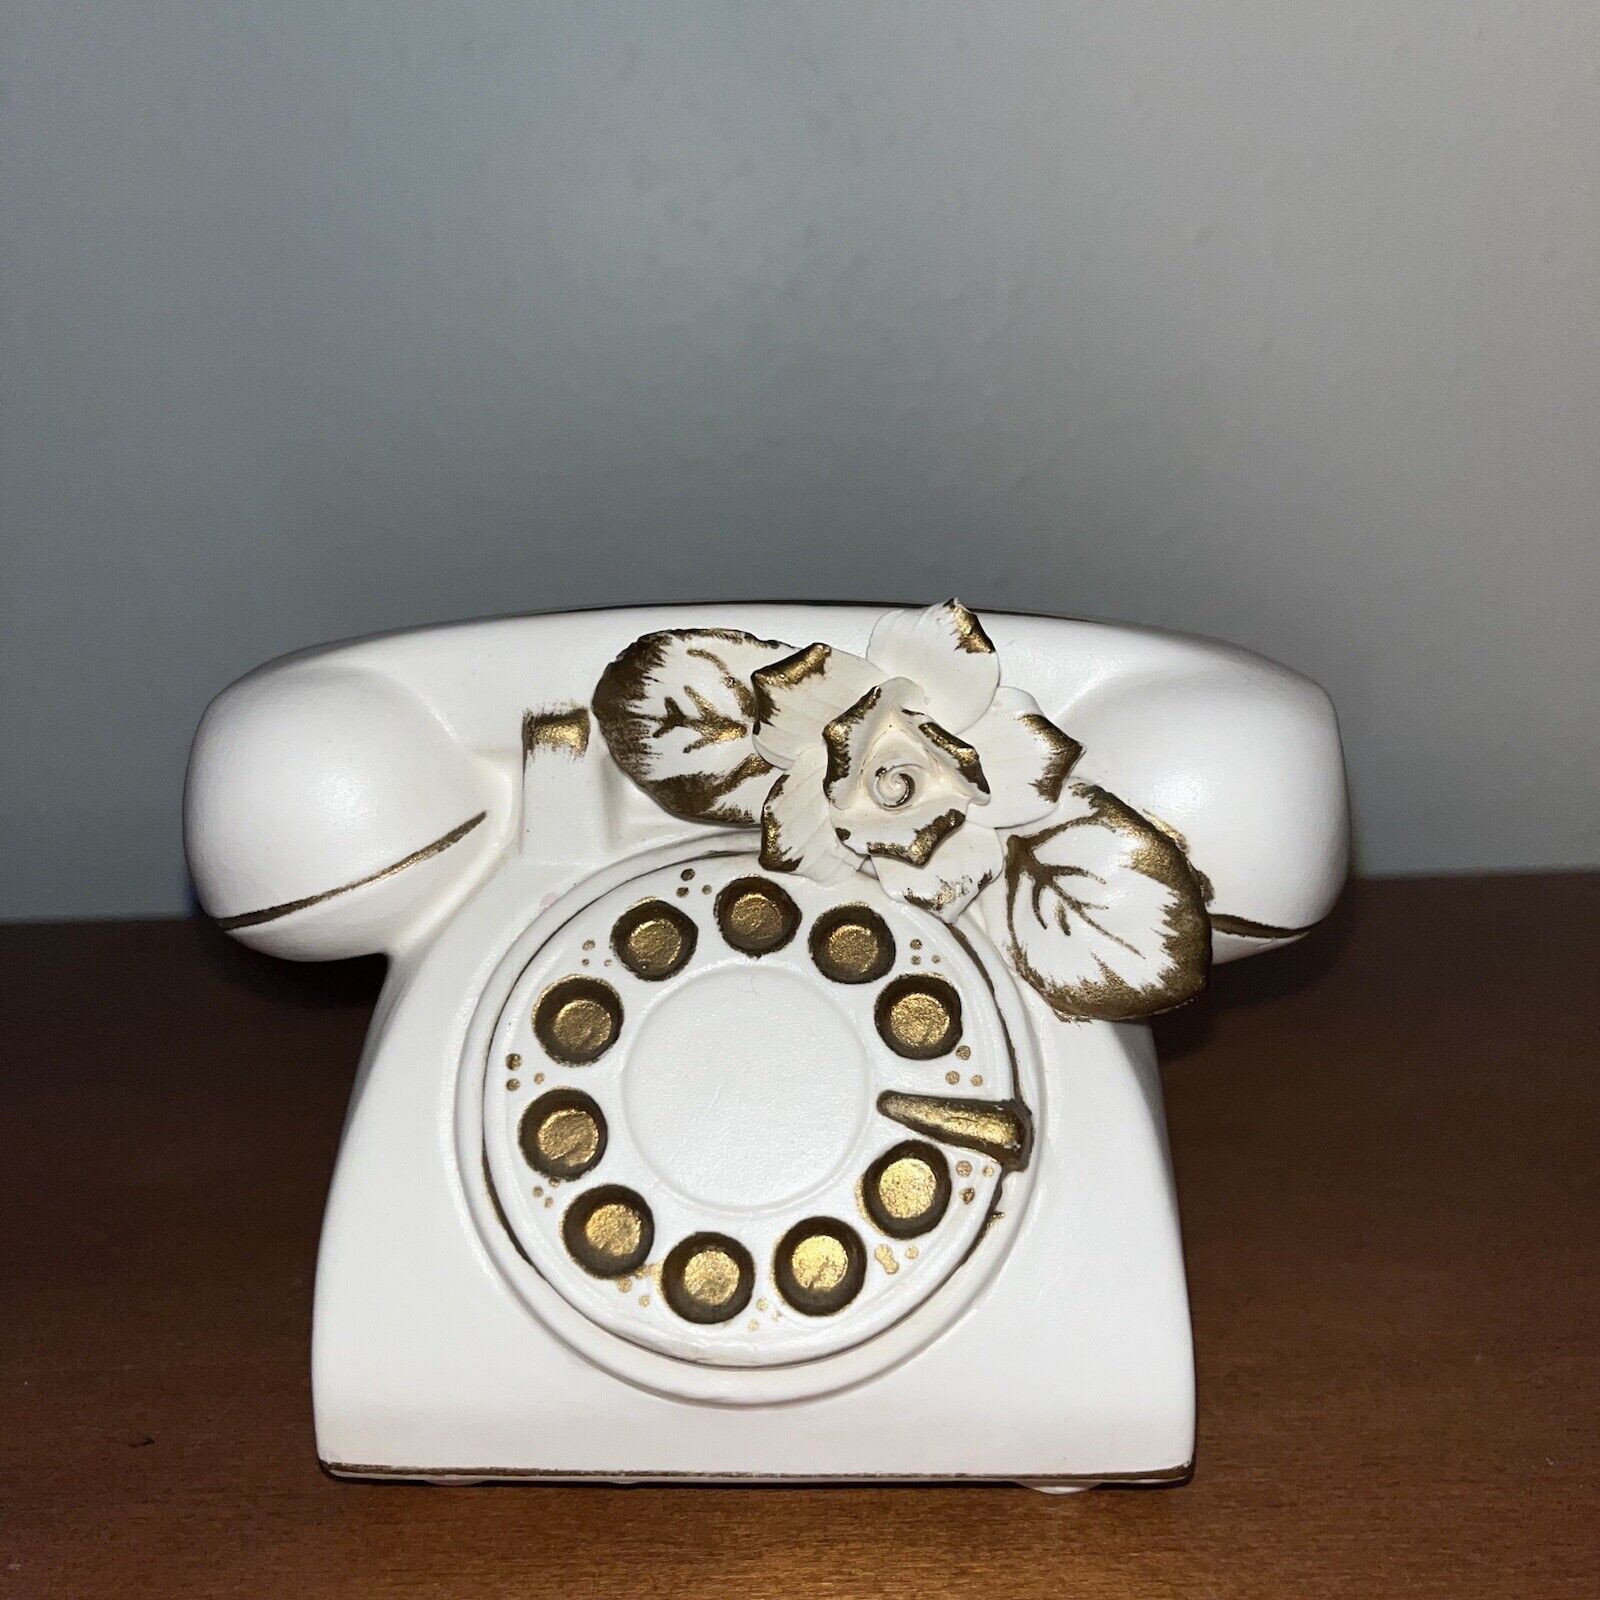 Vintage Heftons White Ceramic Rotary Phone Planter Gold Accents 1950/1960s